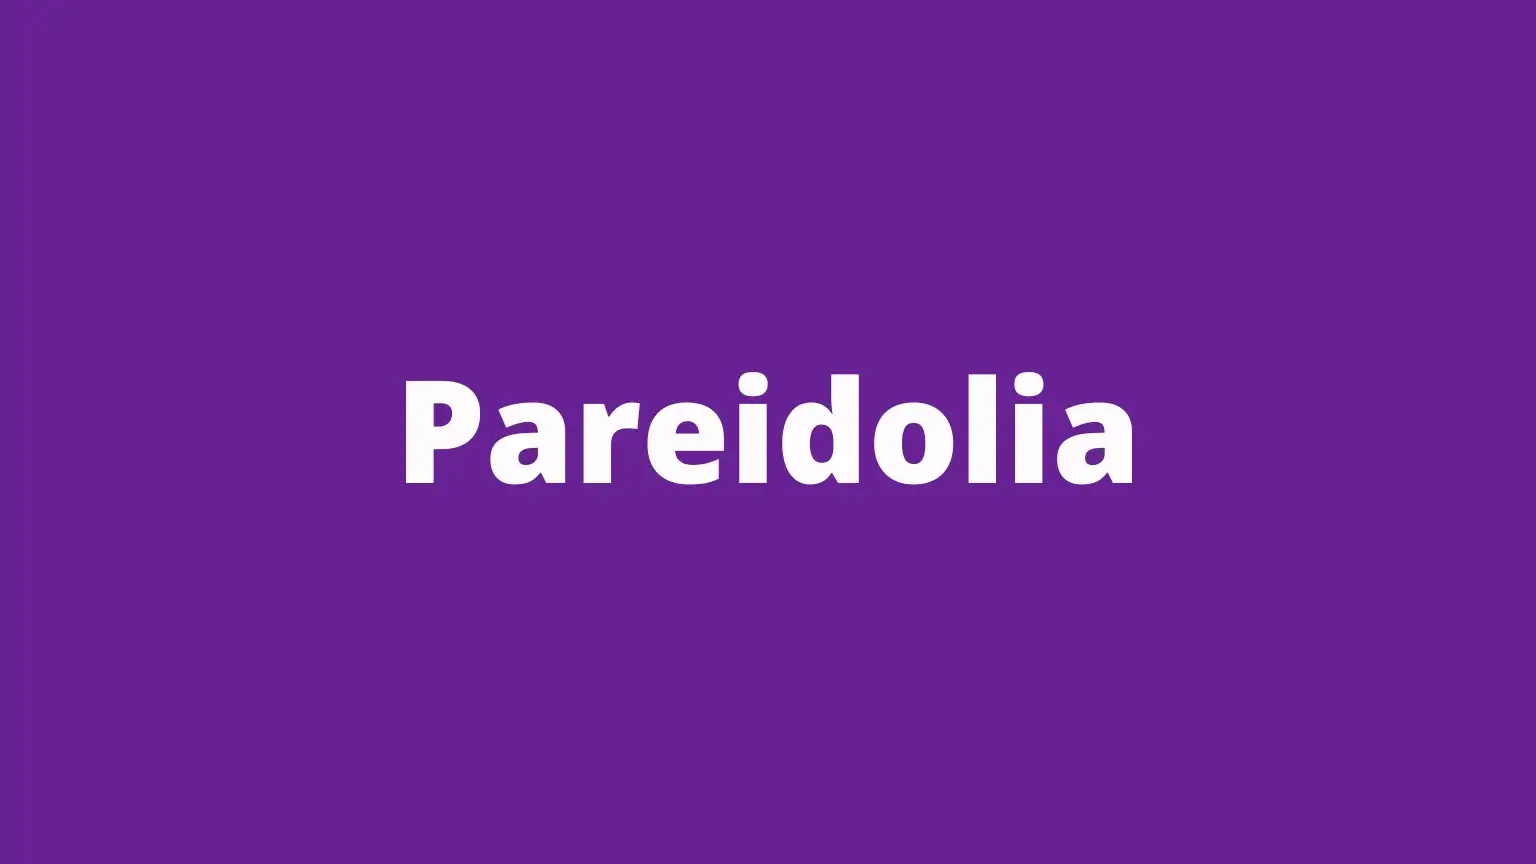 The word pareidolia and its meaning